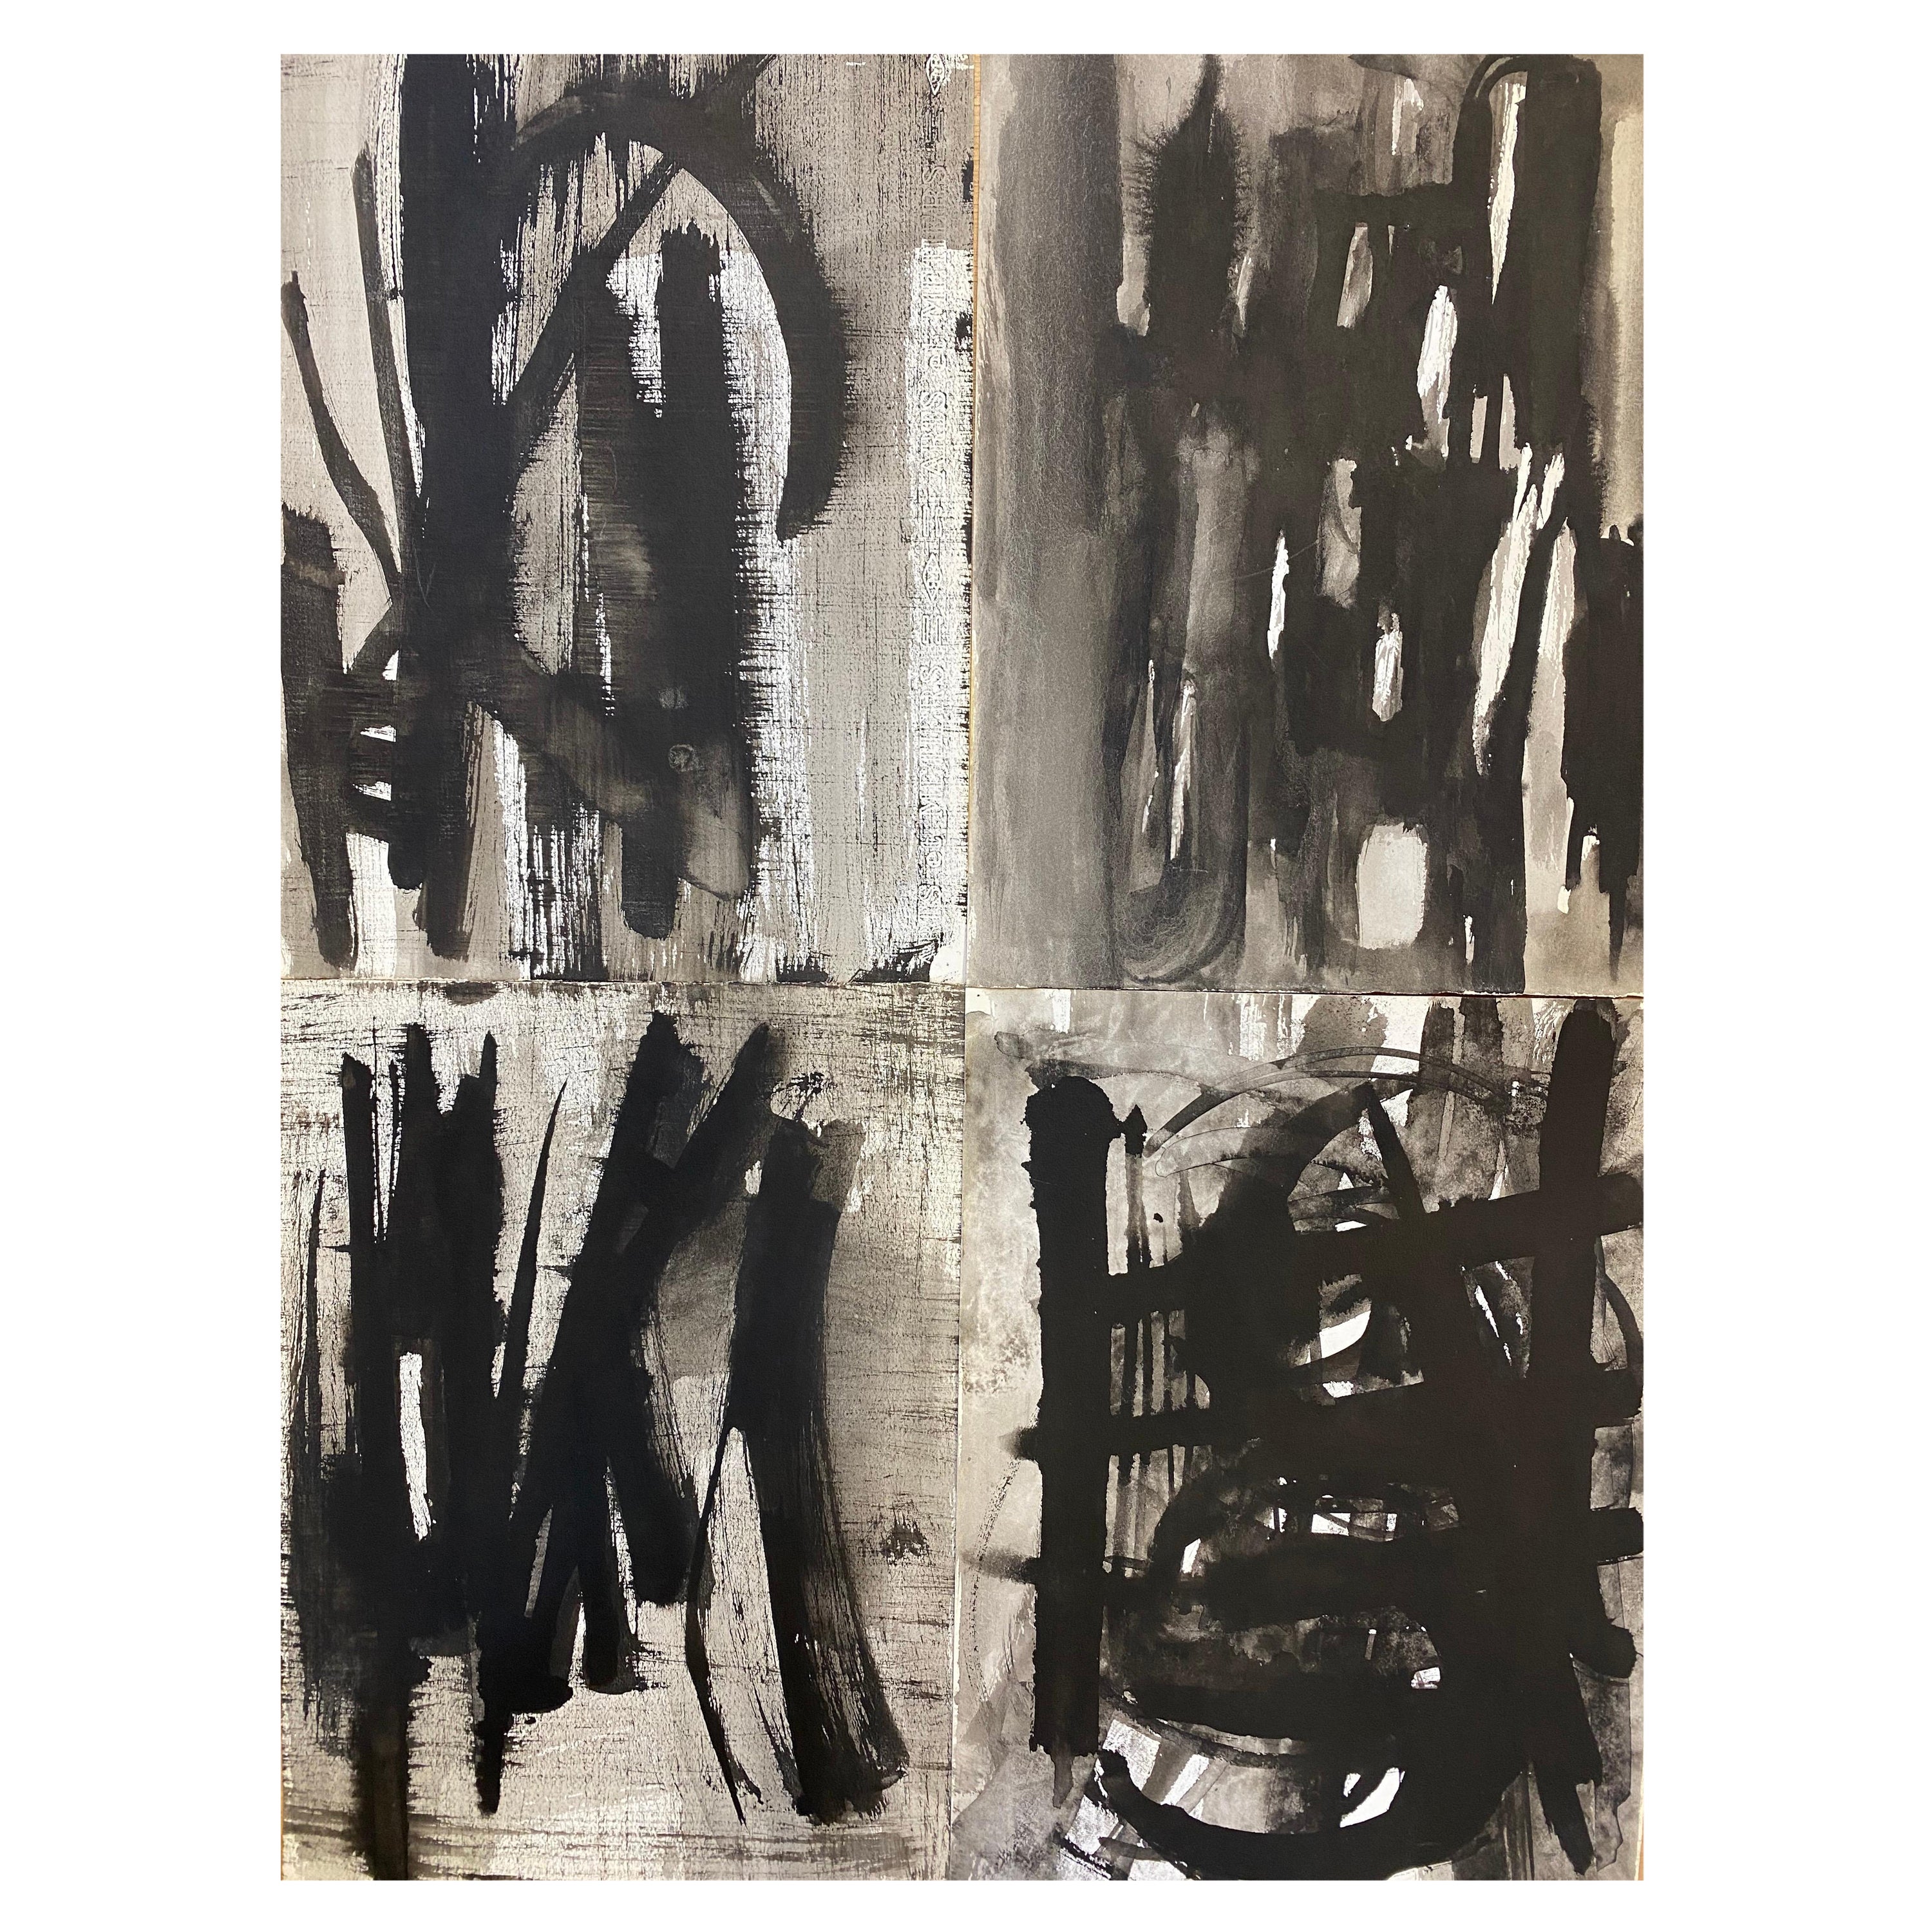 Set of 4, Original 1970's French Abstract Black & White Paintings